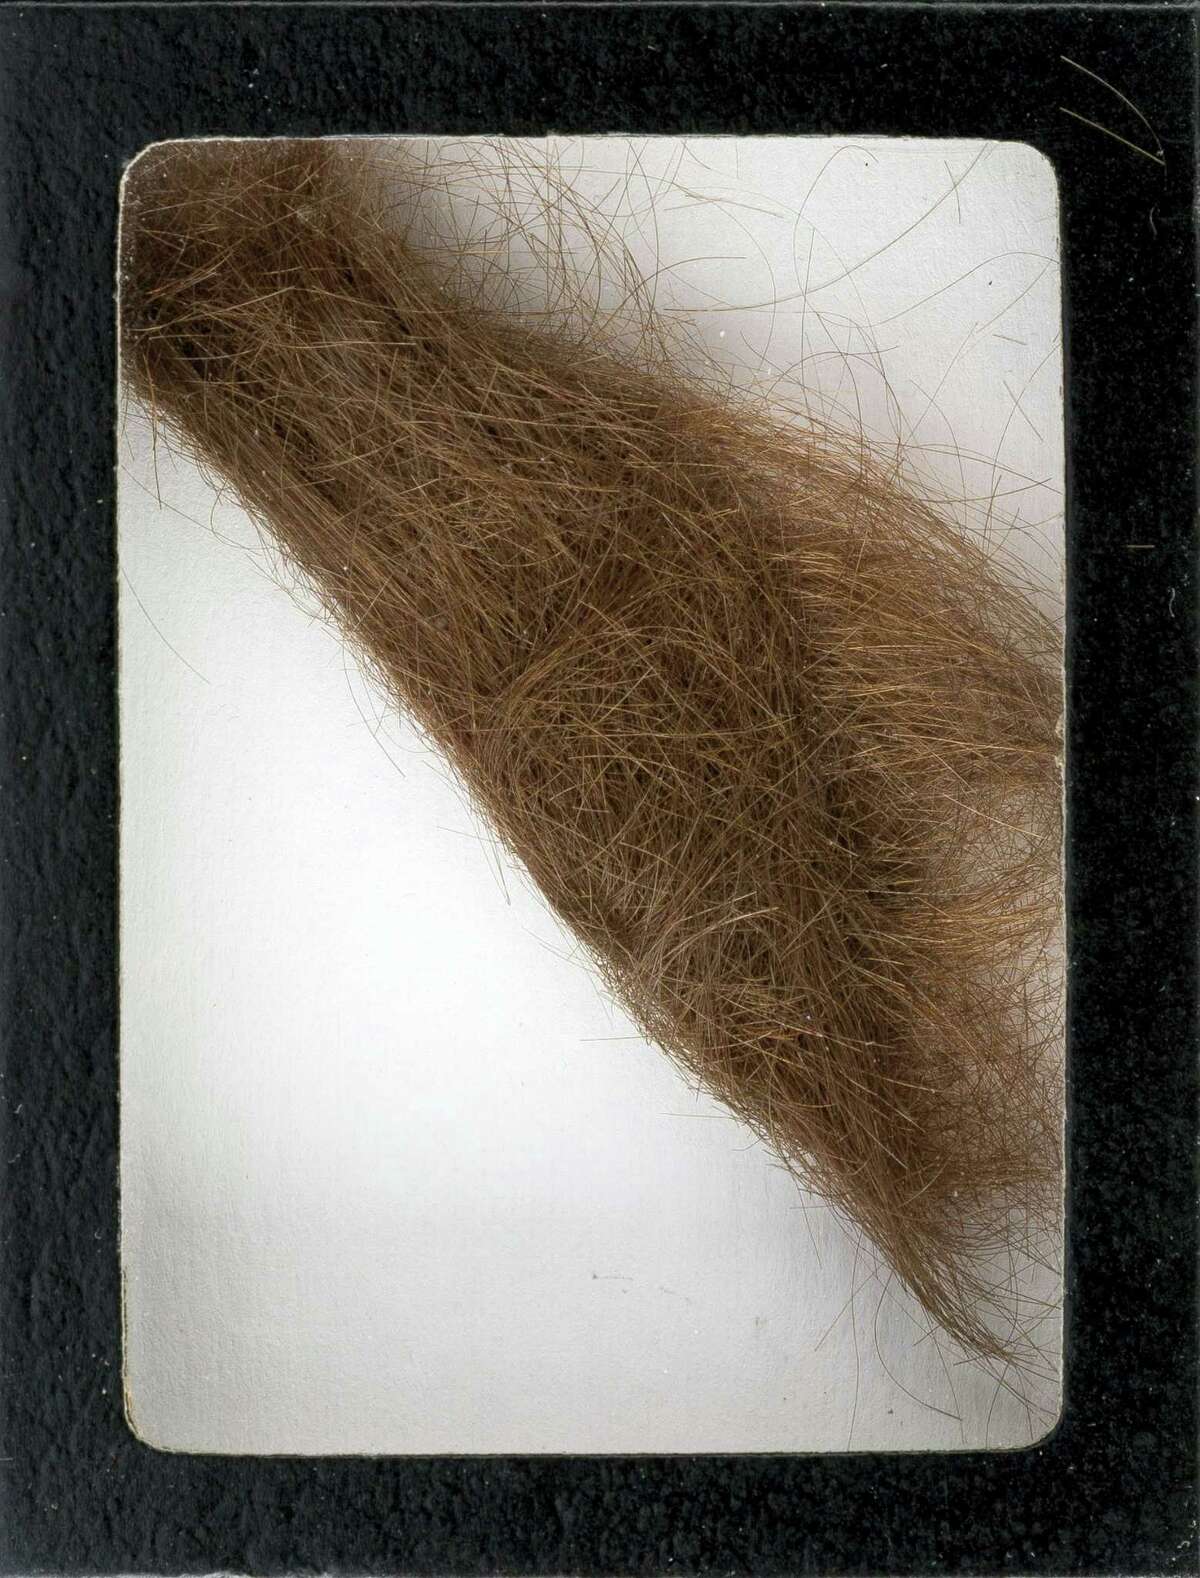 This photo provided by Heritage Auctions shows a 4-inch lock of hair that was collected by a German hairdresser who trimmed John Lennon’s hair before he started shooting “How I Won the War.” Heritage Auctions says the lock of hair is expected to sell for $10,000 at a Dallas auction later this month.